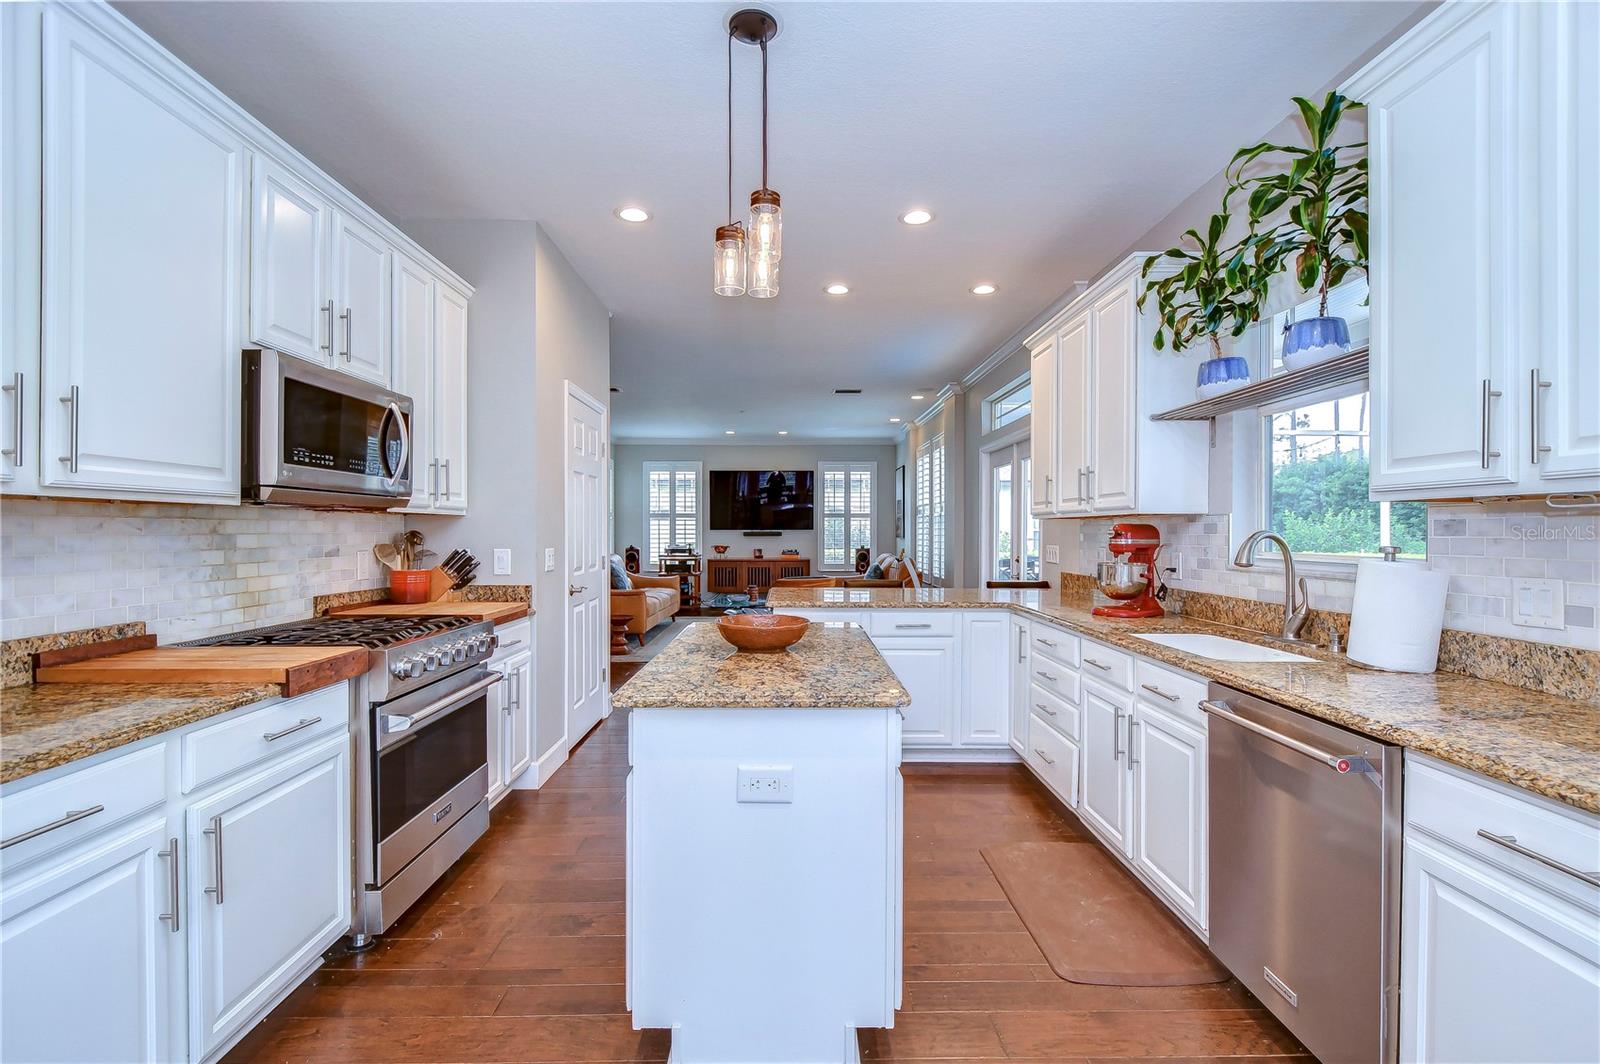 Stainless appliances including a 5-burner Viking stove and a spacious island!